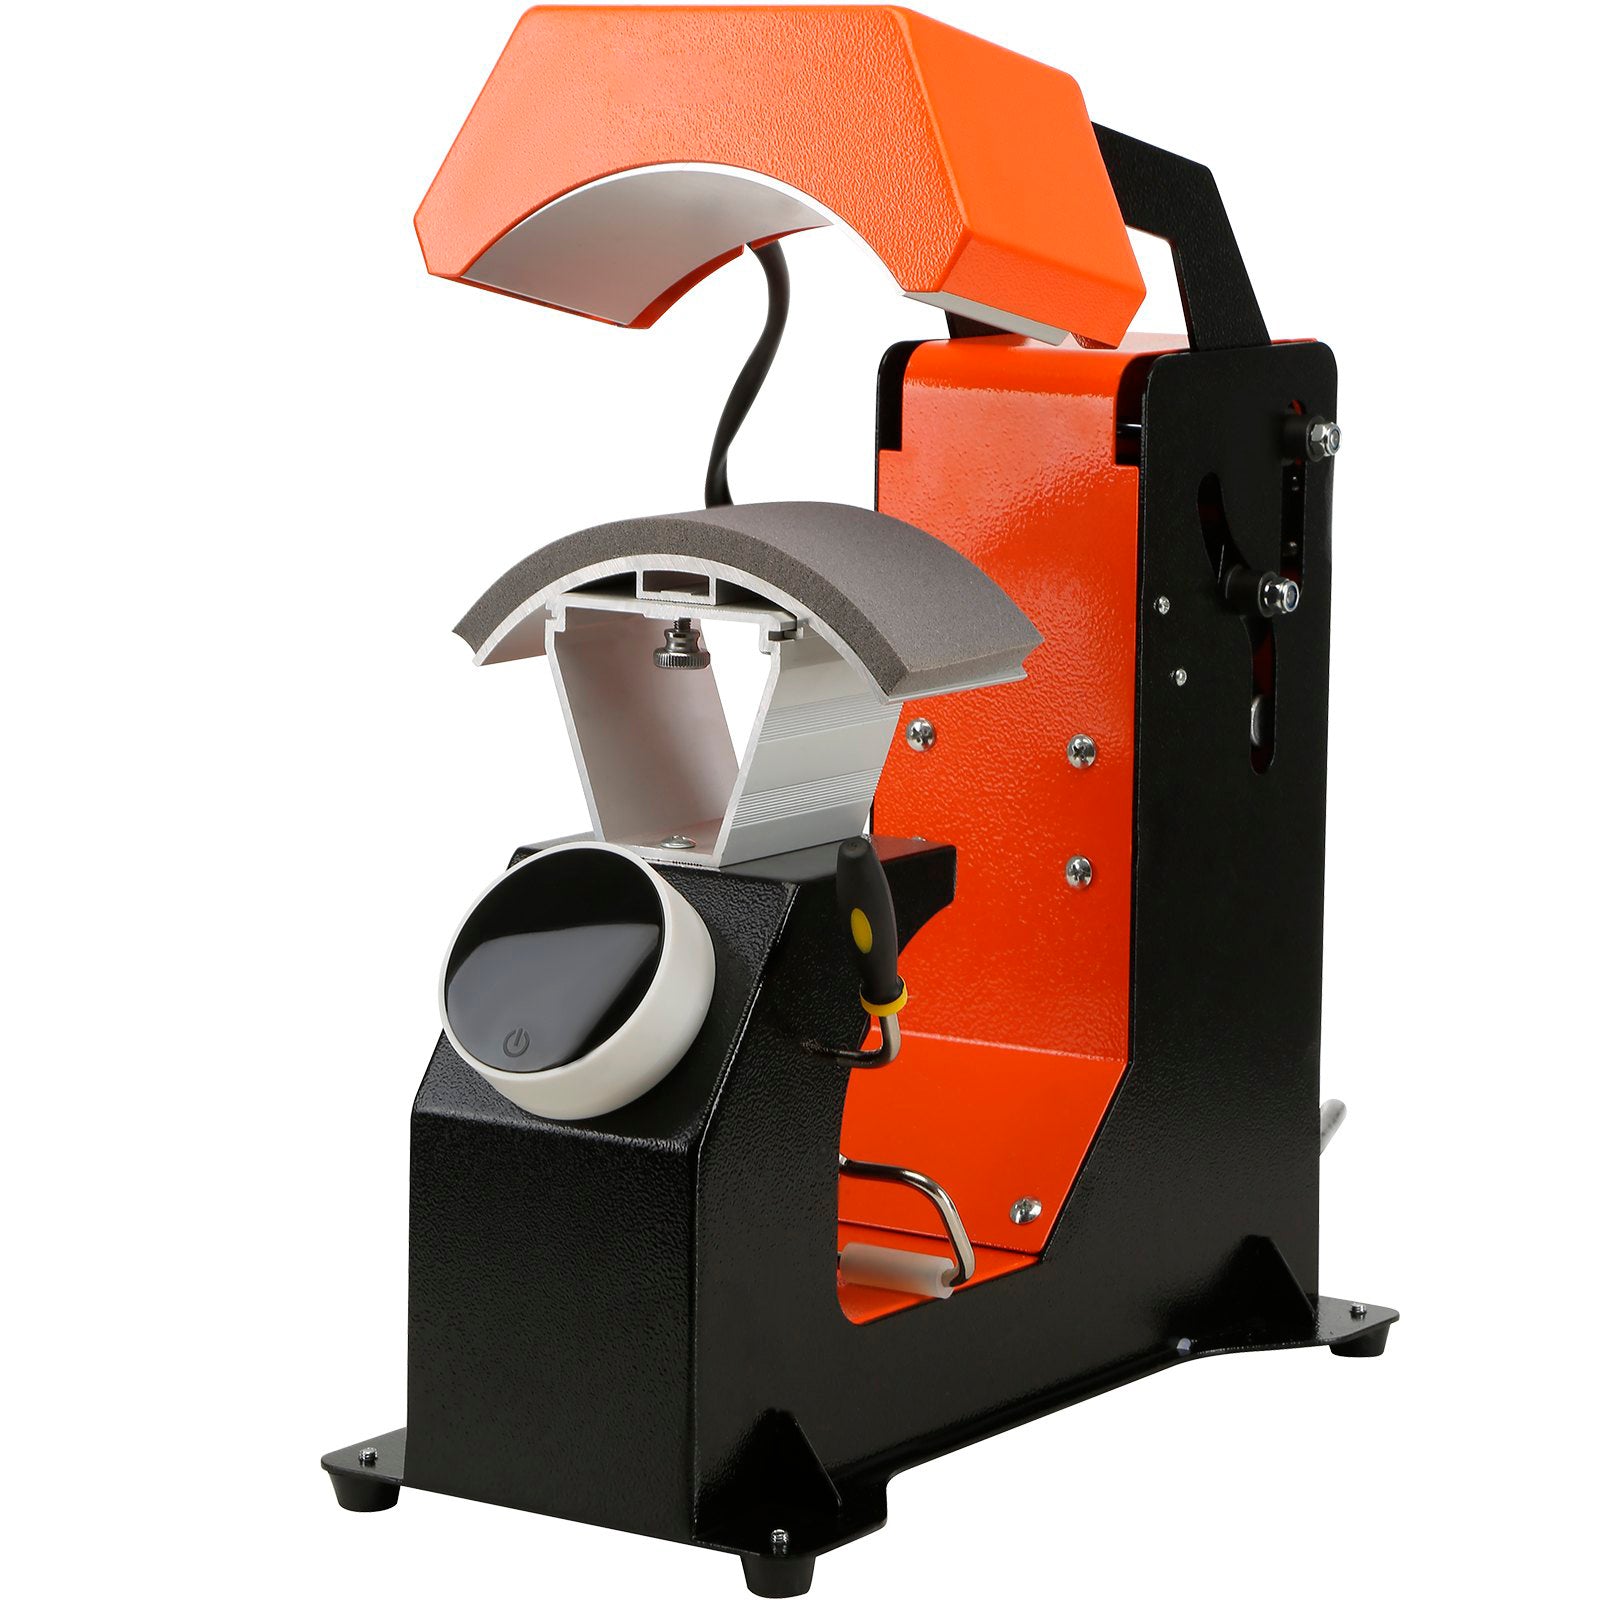 3-in-1 cap transfer press including 3 different heating elements